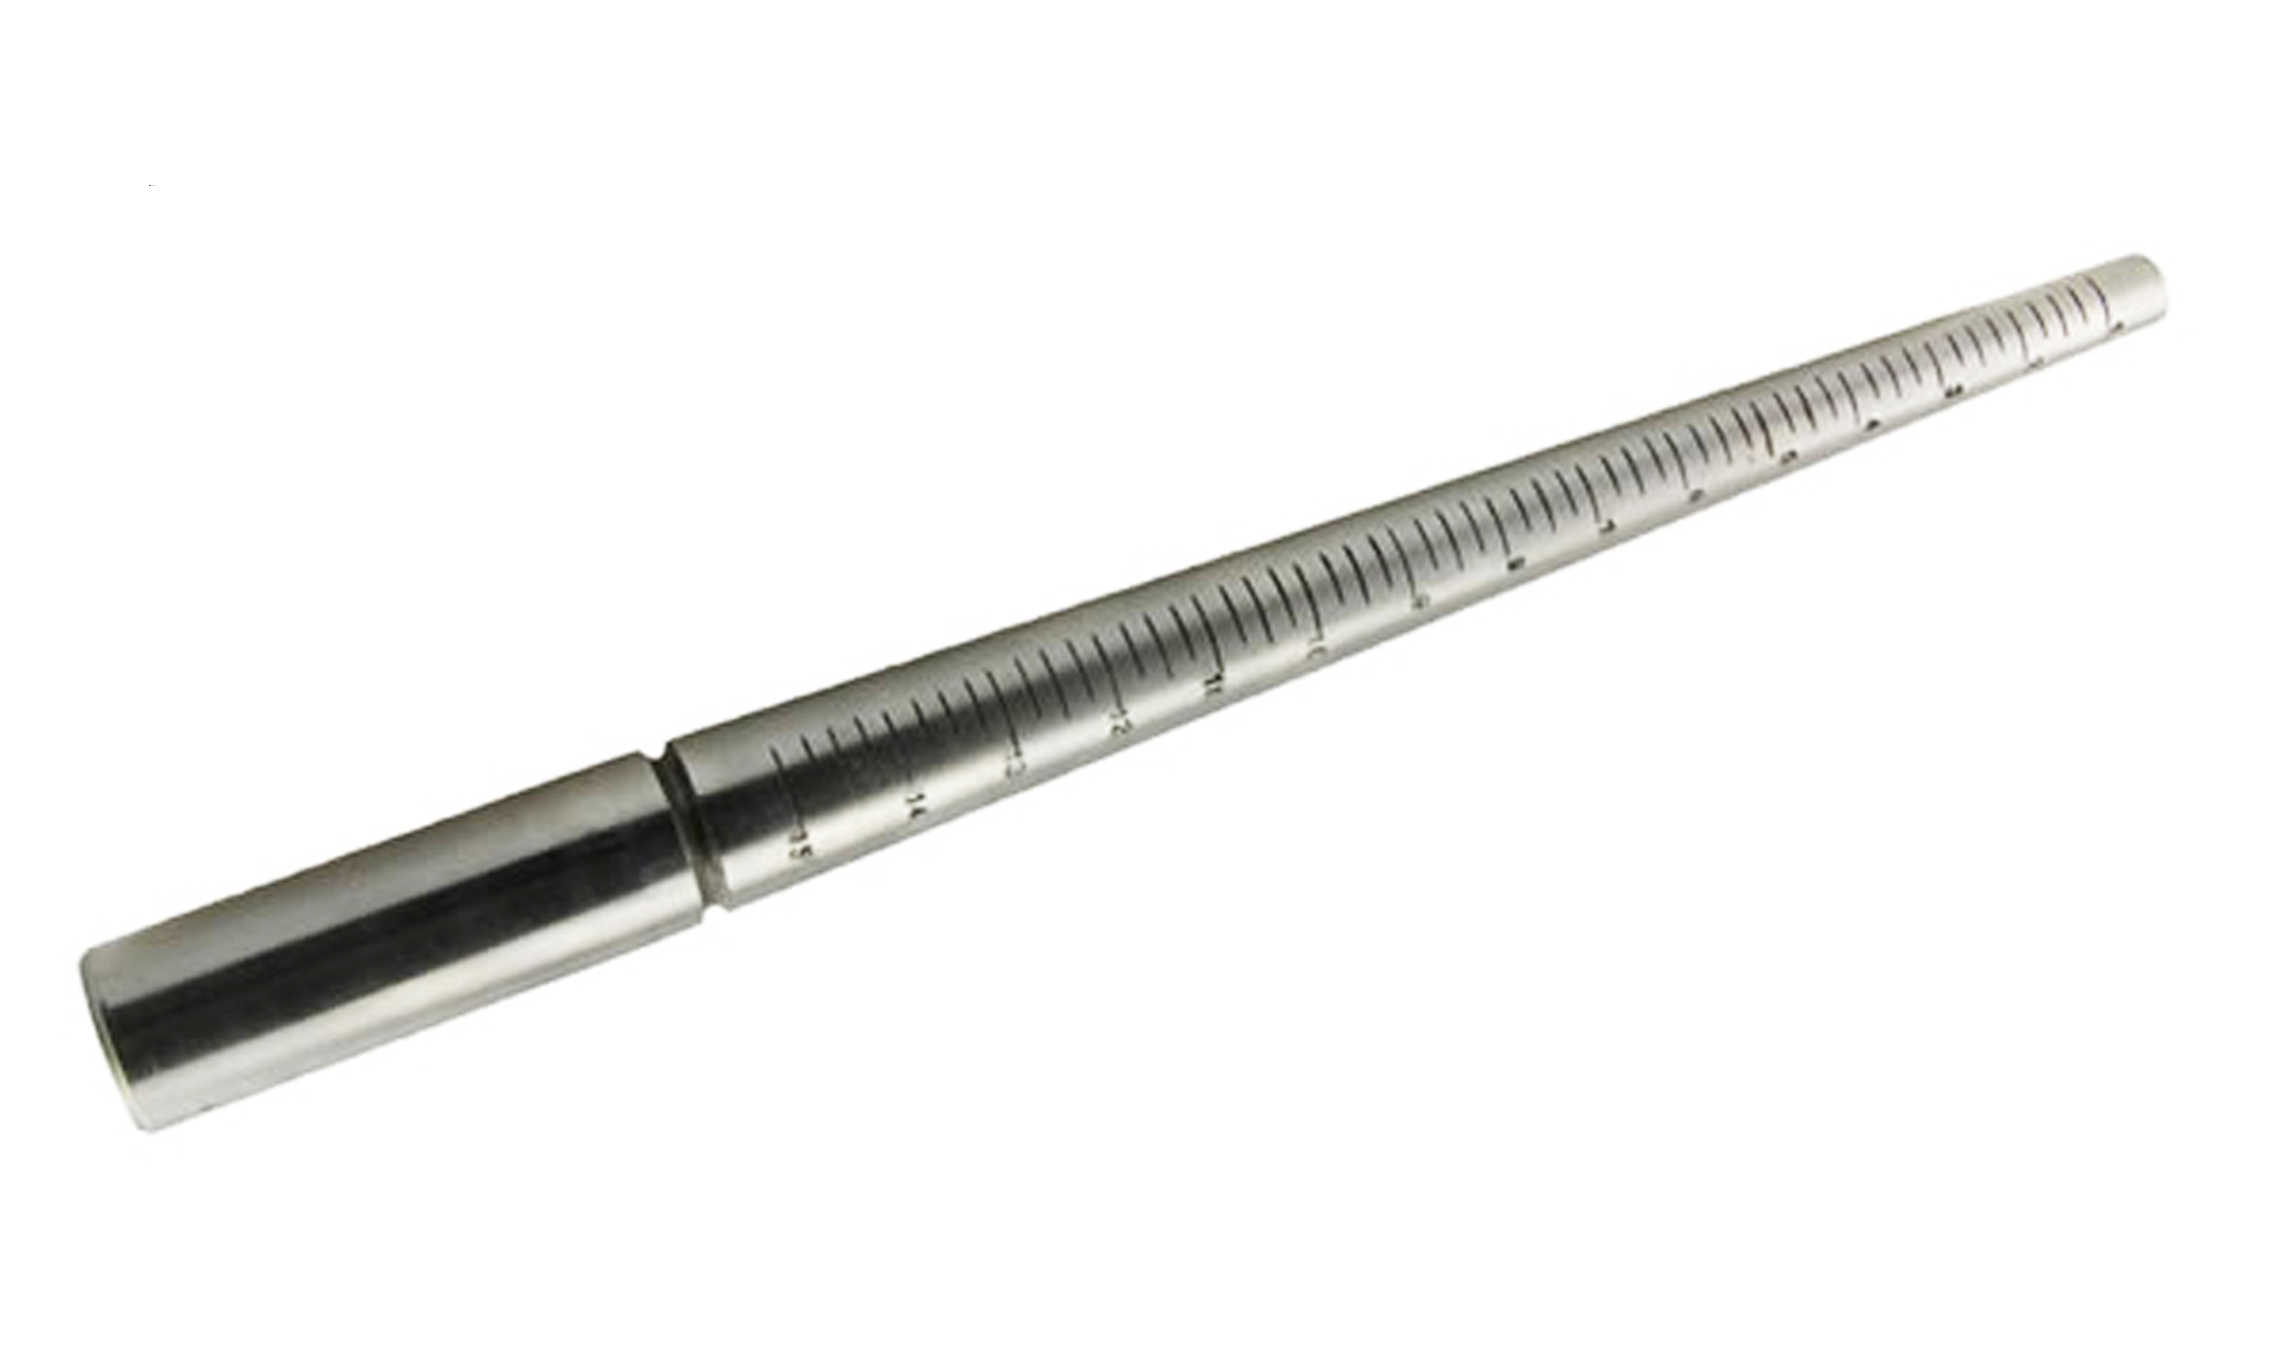 STEEL RING MANDREL , ungrooved, marked 1-15